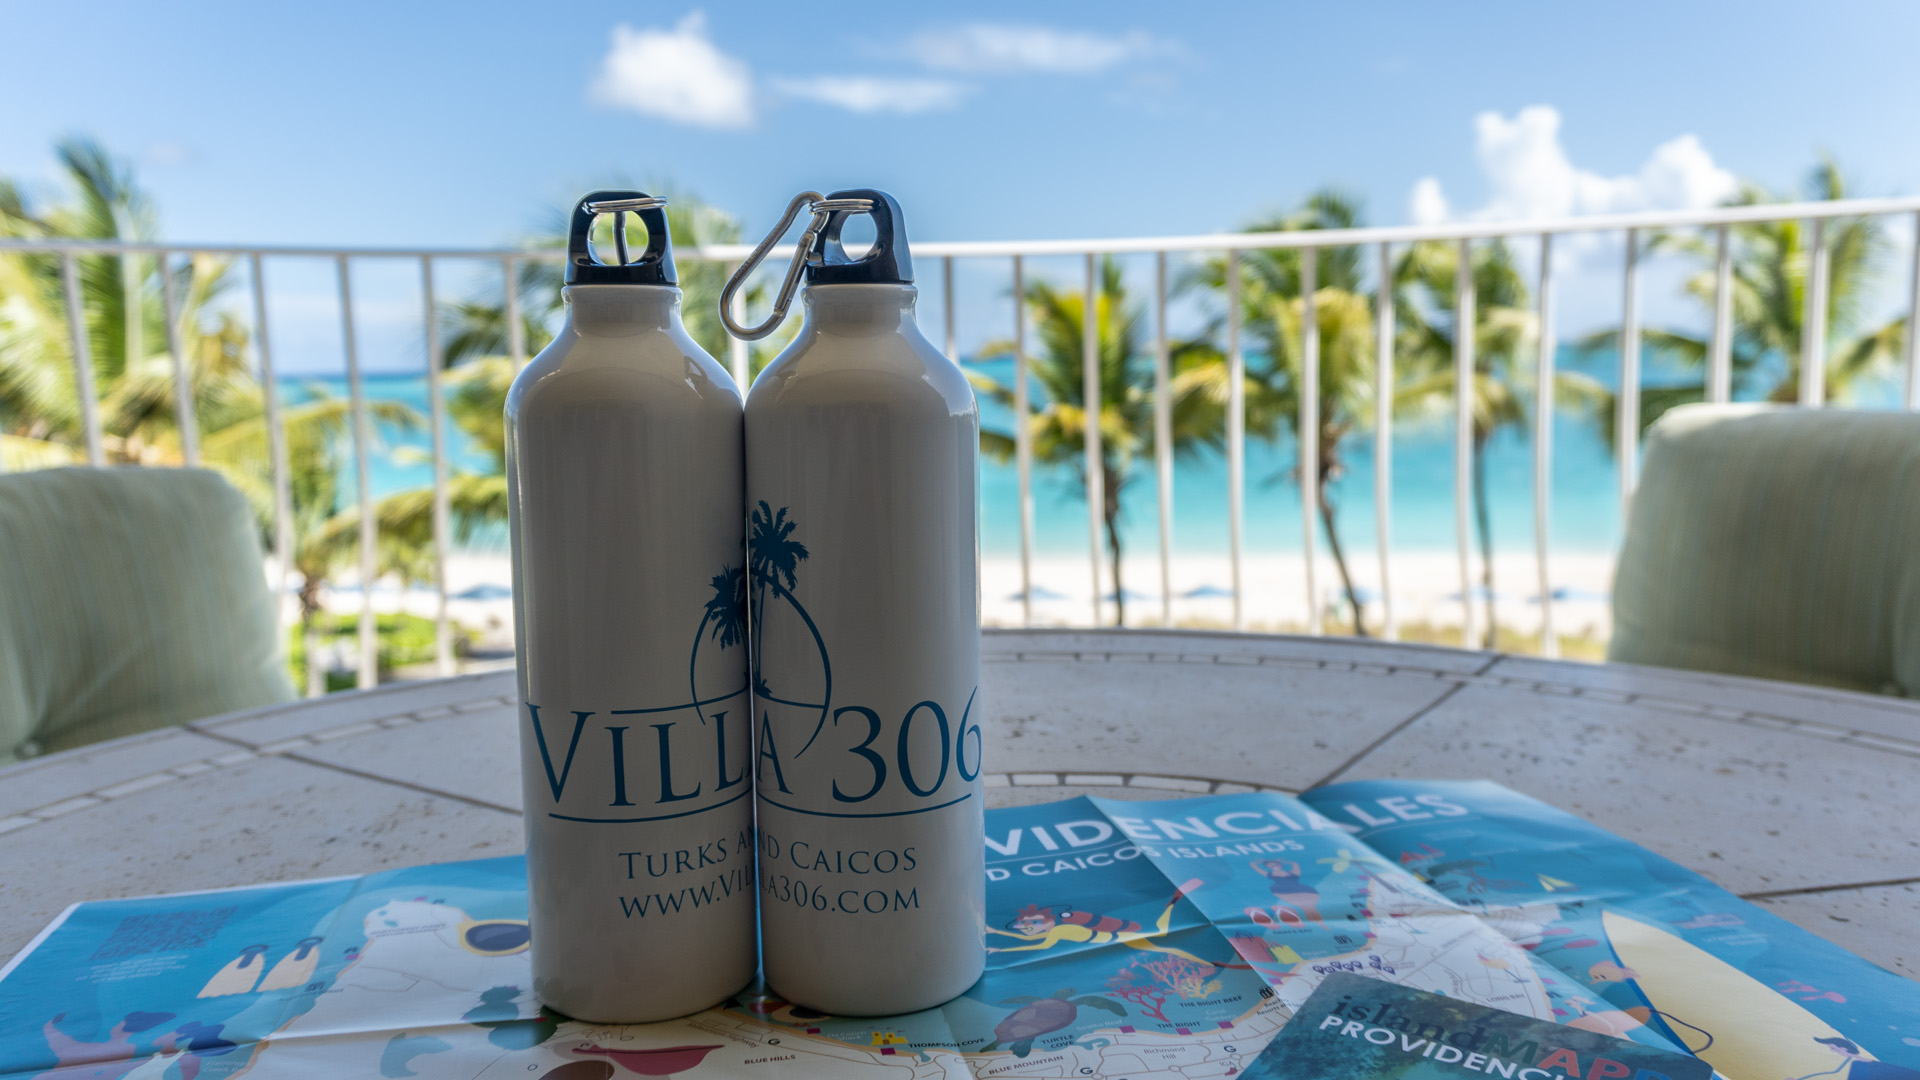 Villa 306 provides plenty of Yeti tumblers, cocktail glasses and water bottles to stay hydrated all day long.